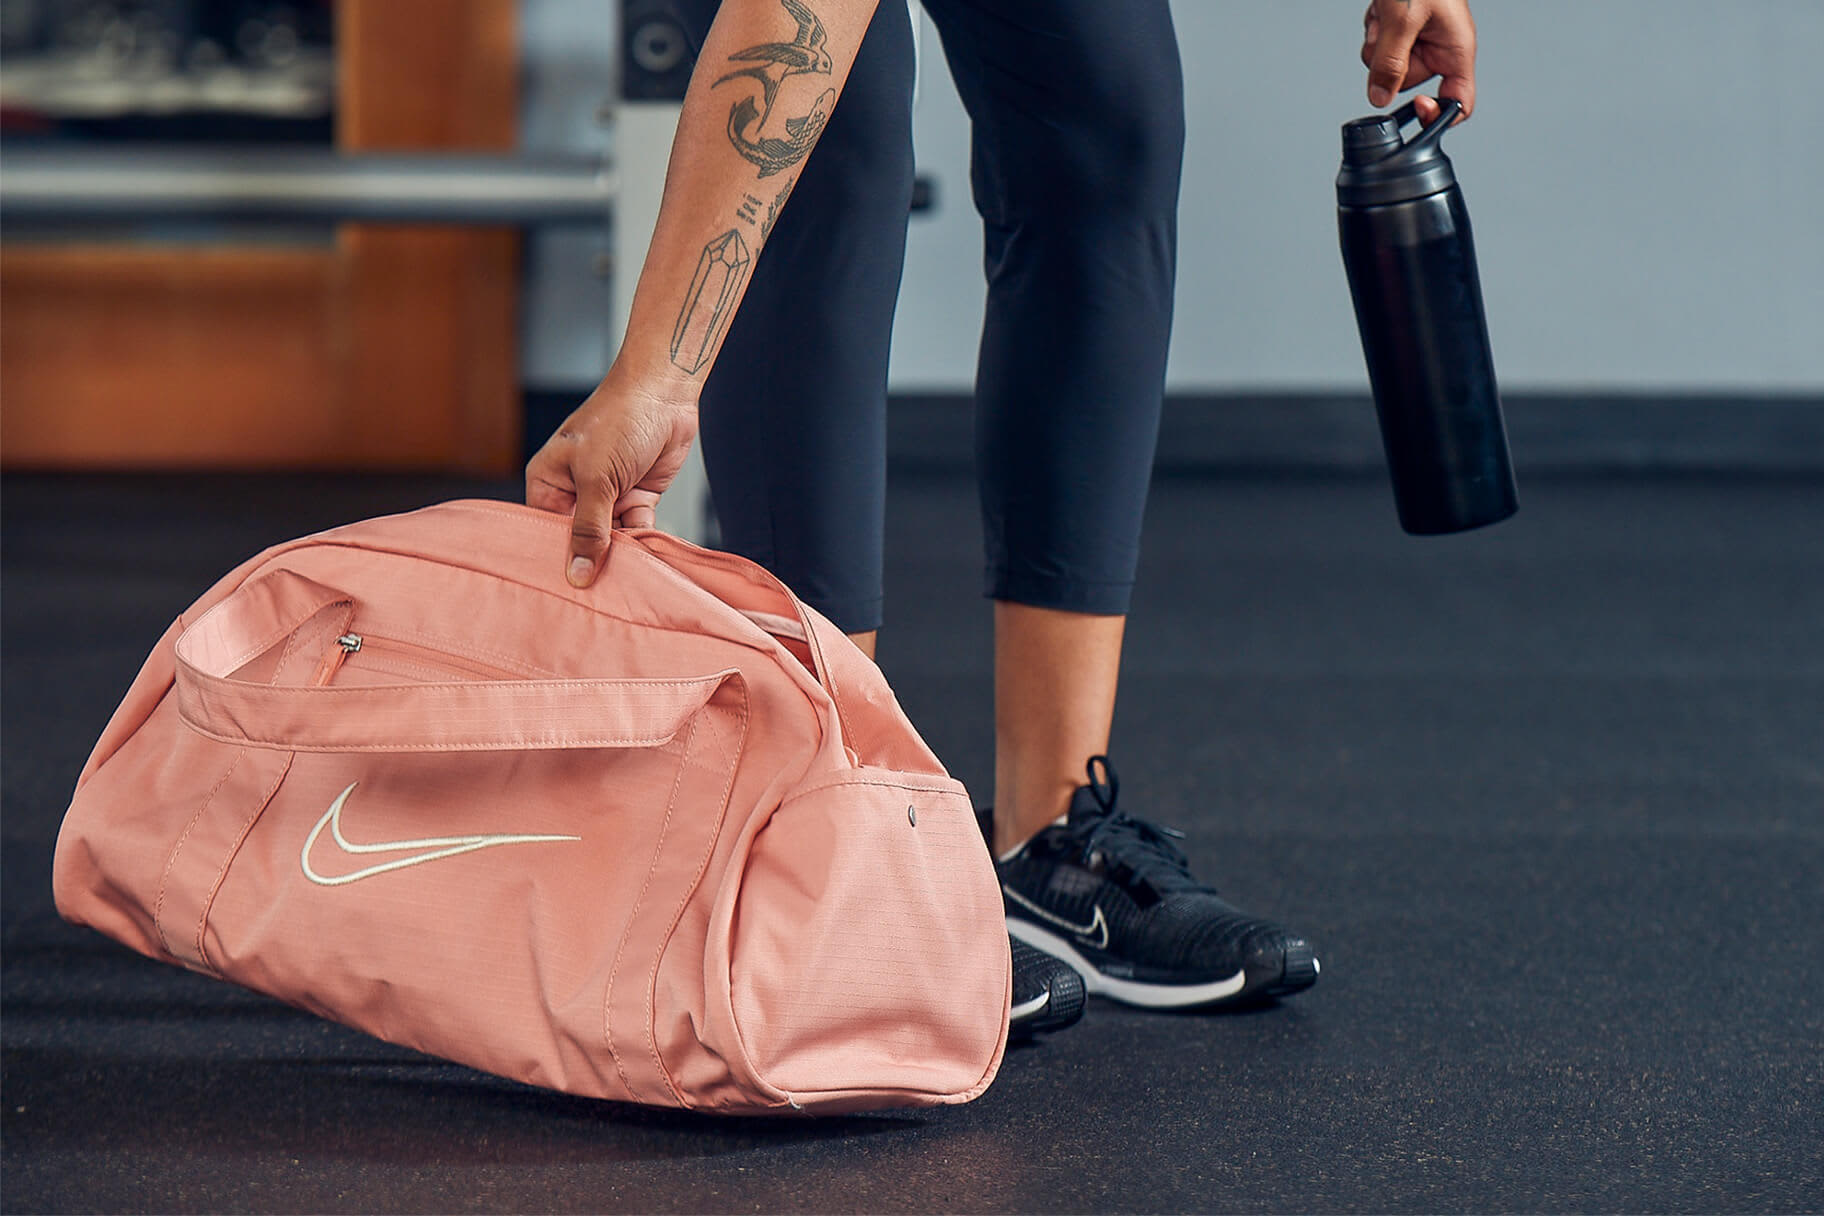 The 8 best fitness gifts from Nike